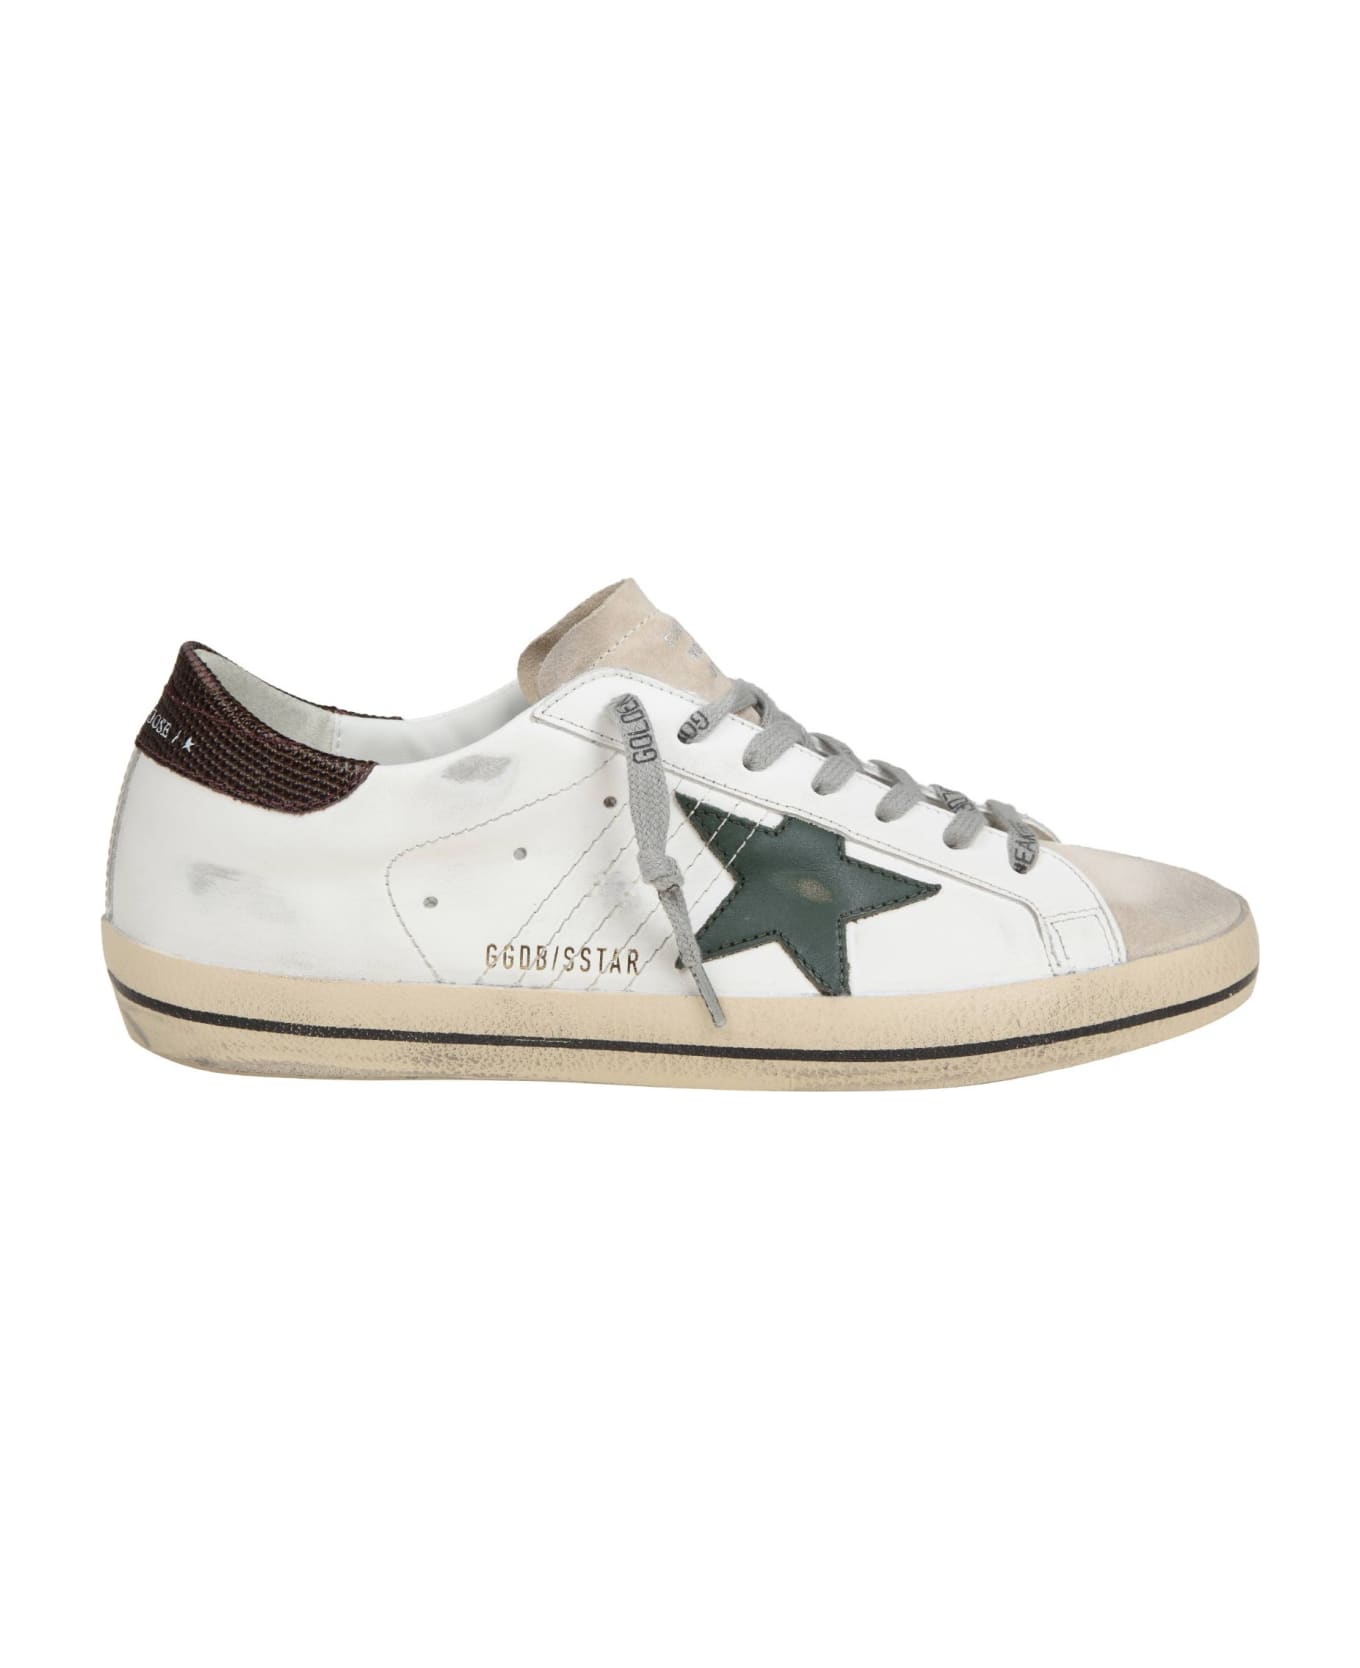 Golden Goose Super Star In White And Green Leather And Suede - WHT/GREEN BROWN